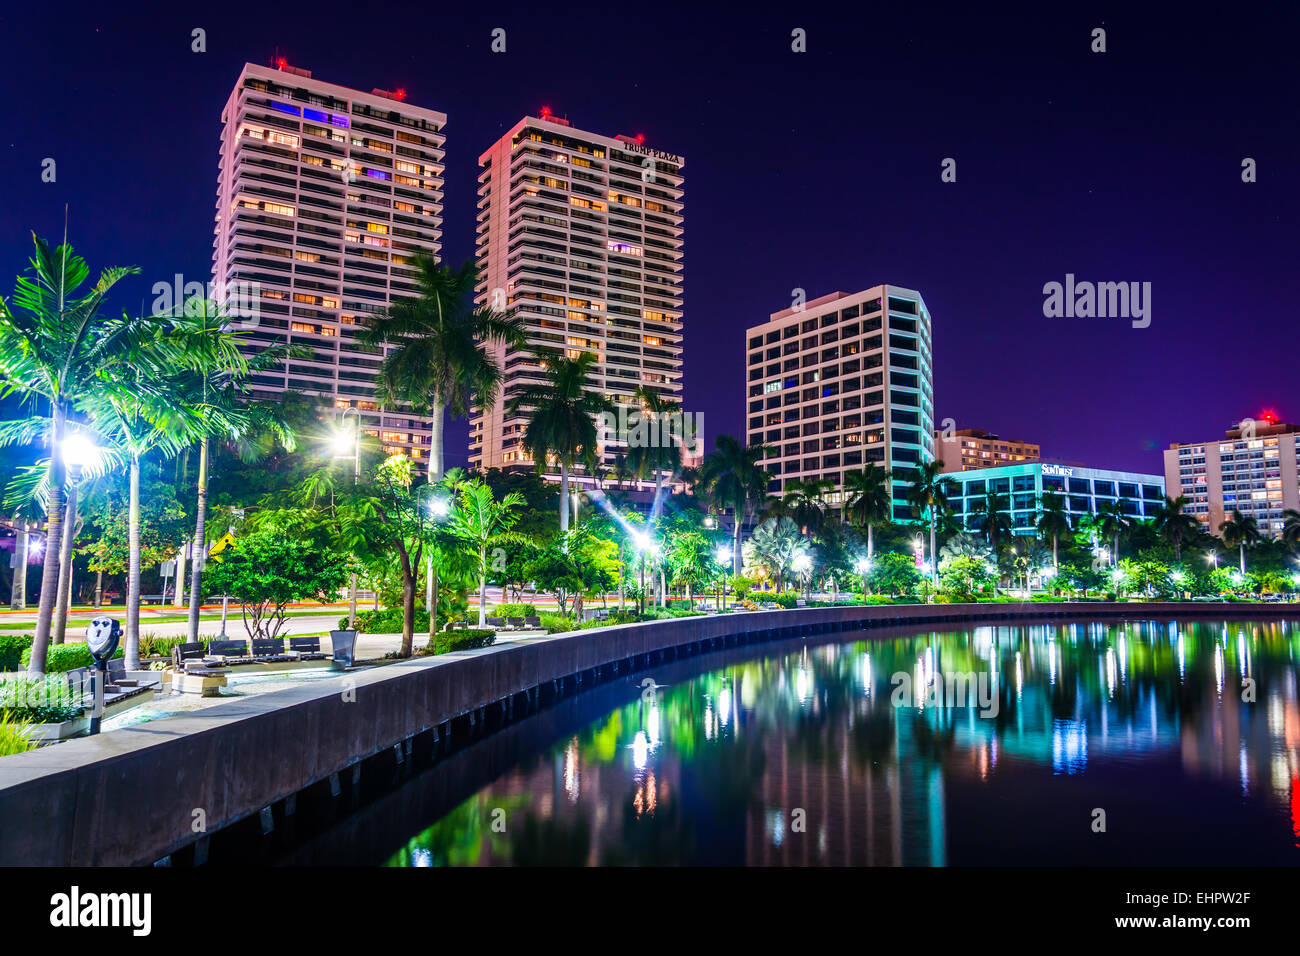 Palm trees along the Intracoastal Waterway and the skyline at night in West Palm Beach, Florida. Stock Photo